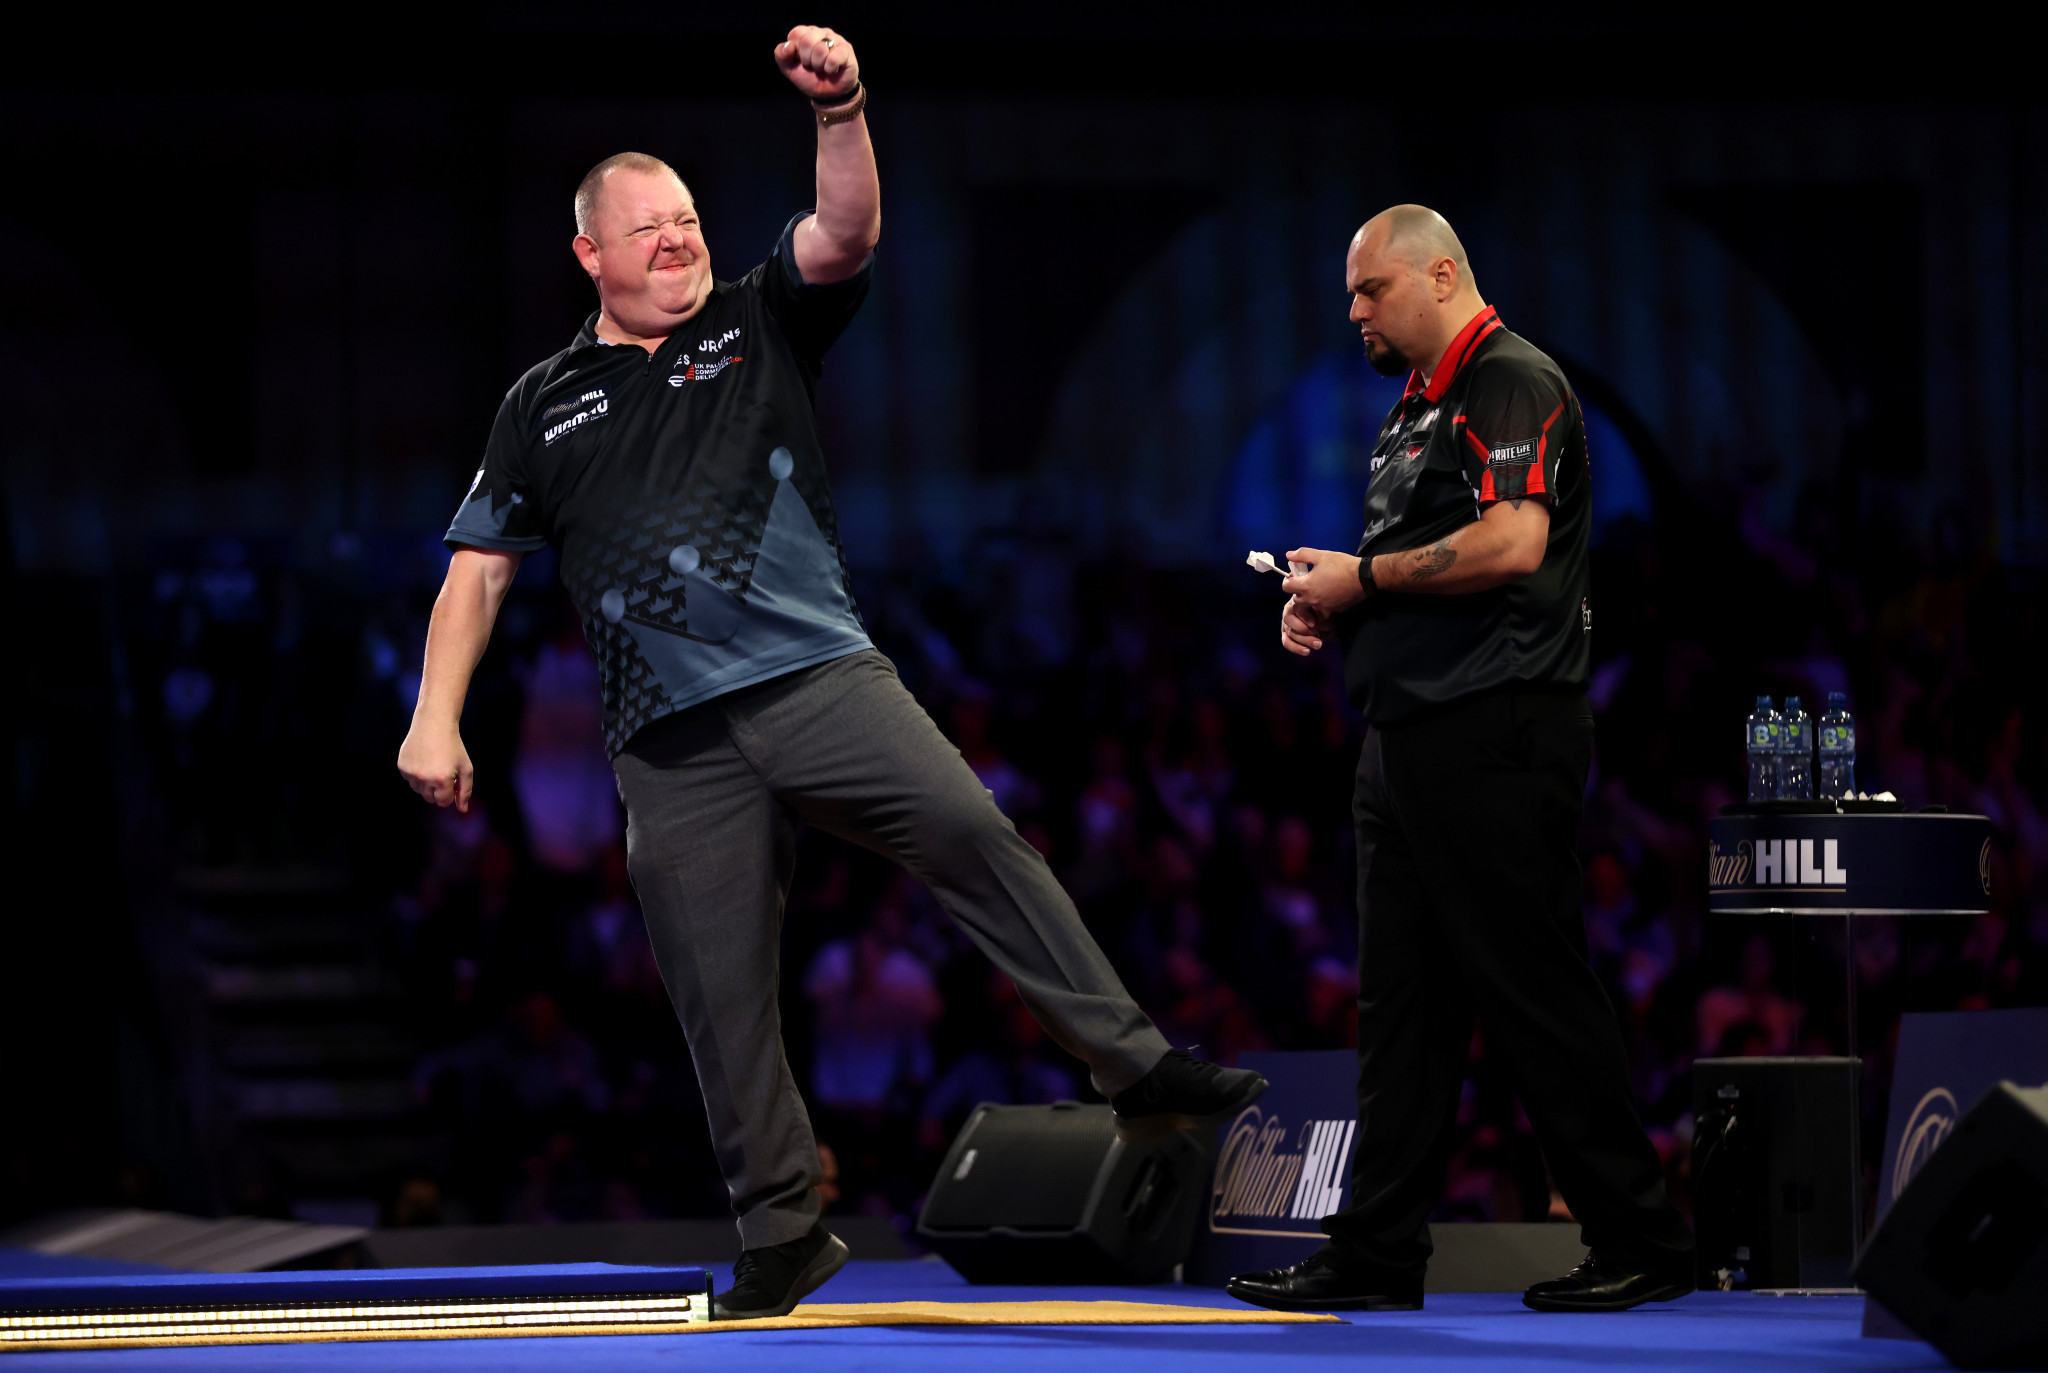 King and Humphries come back from brink to win thrillers at PDC World Darts Championship